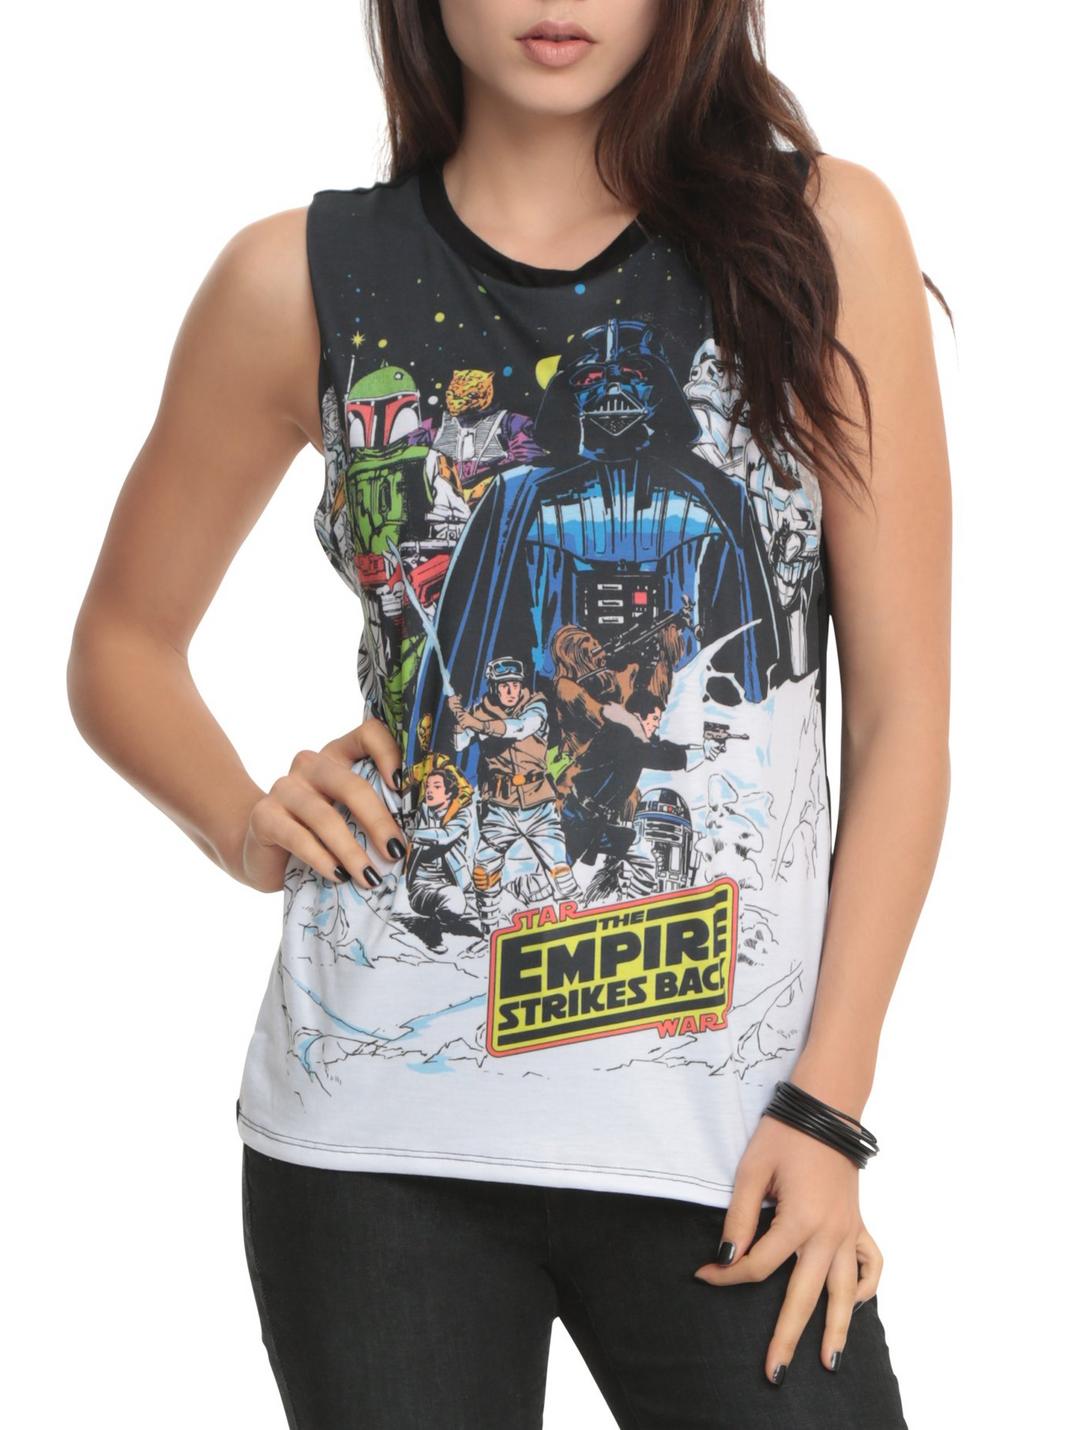 Star Wars The Empire Strikes Back Girls Muscle Top, BLACK, hi-res